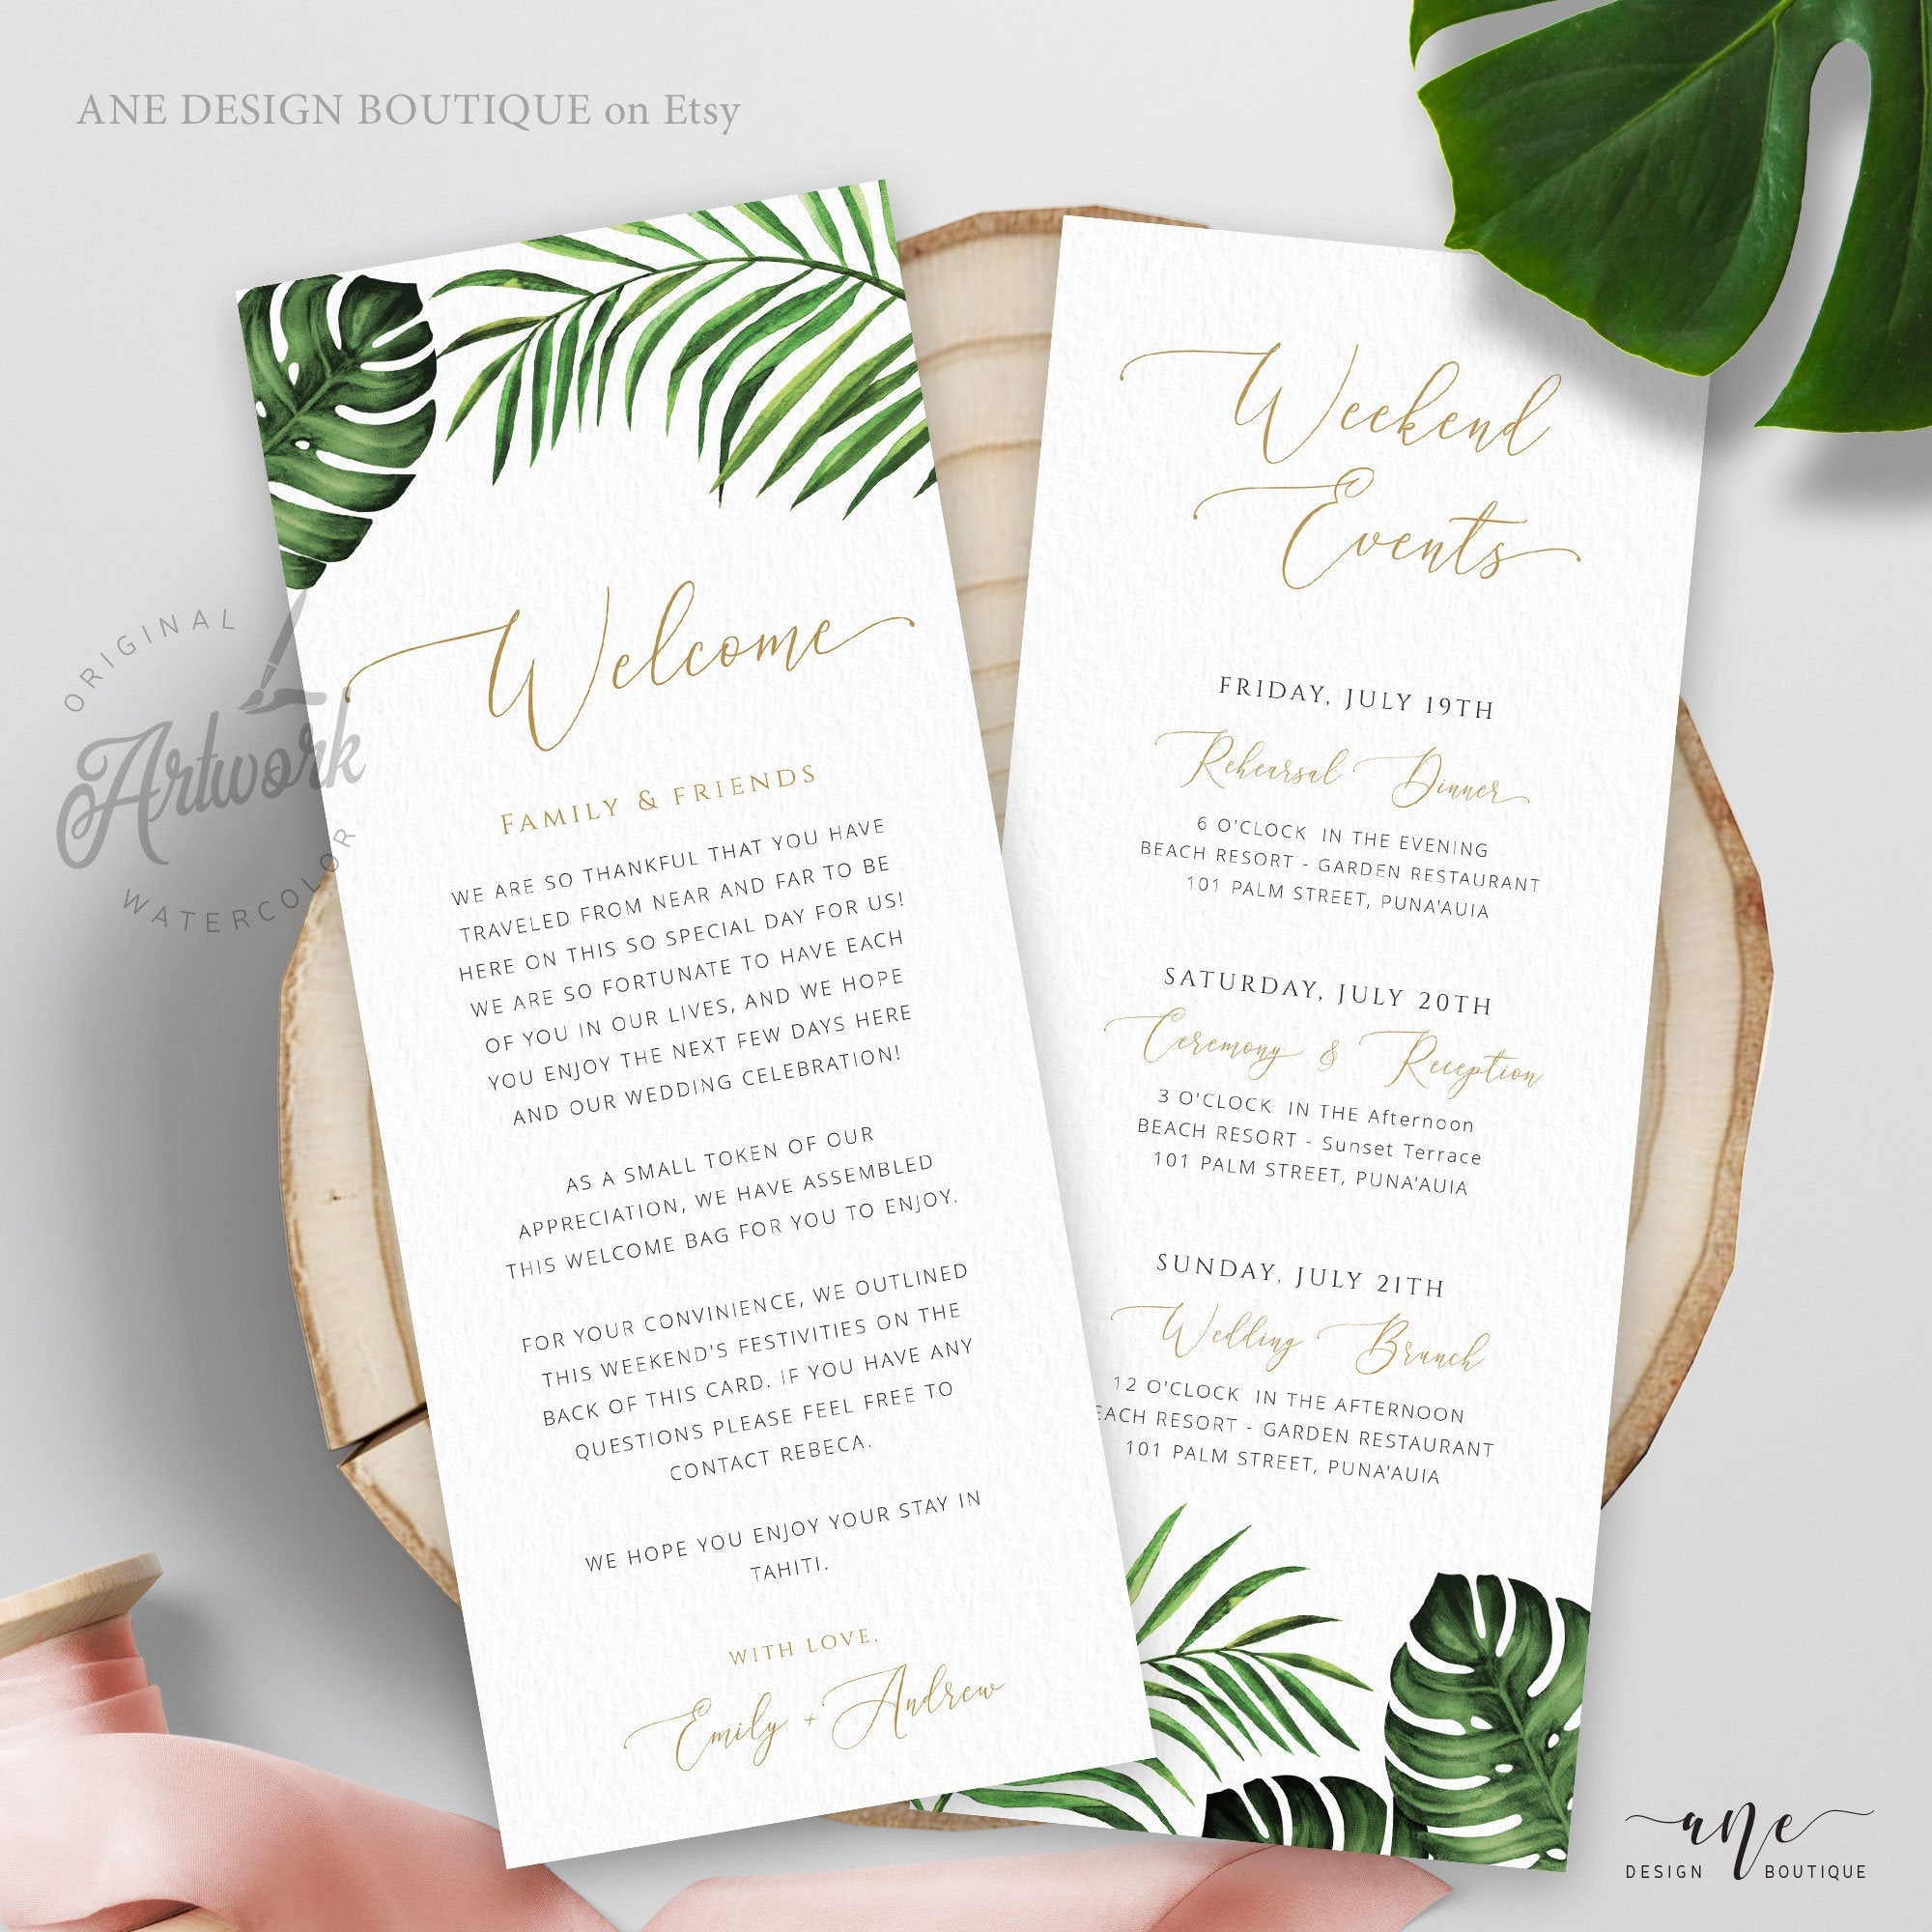 Personalized Wedding Welcome Letter & Itinerary - Palm